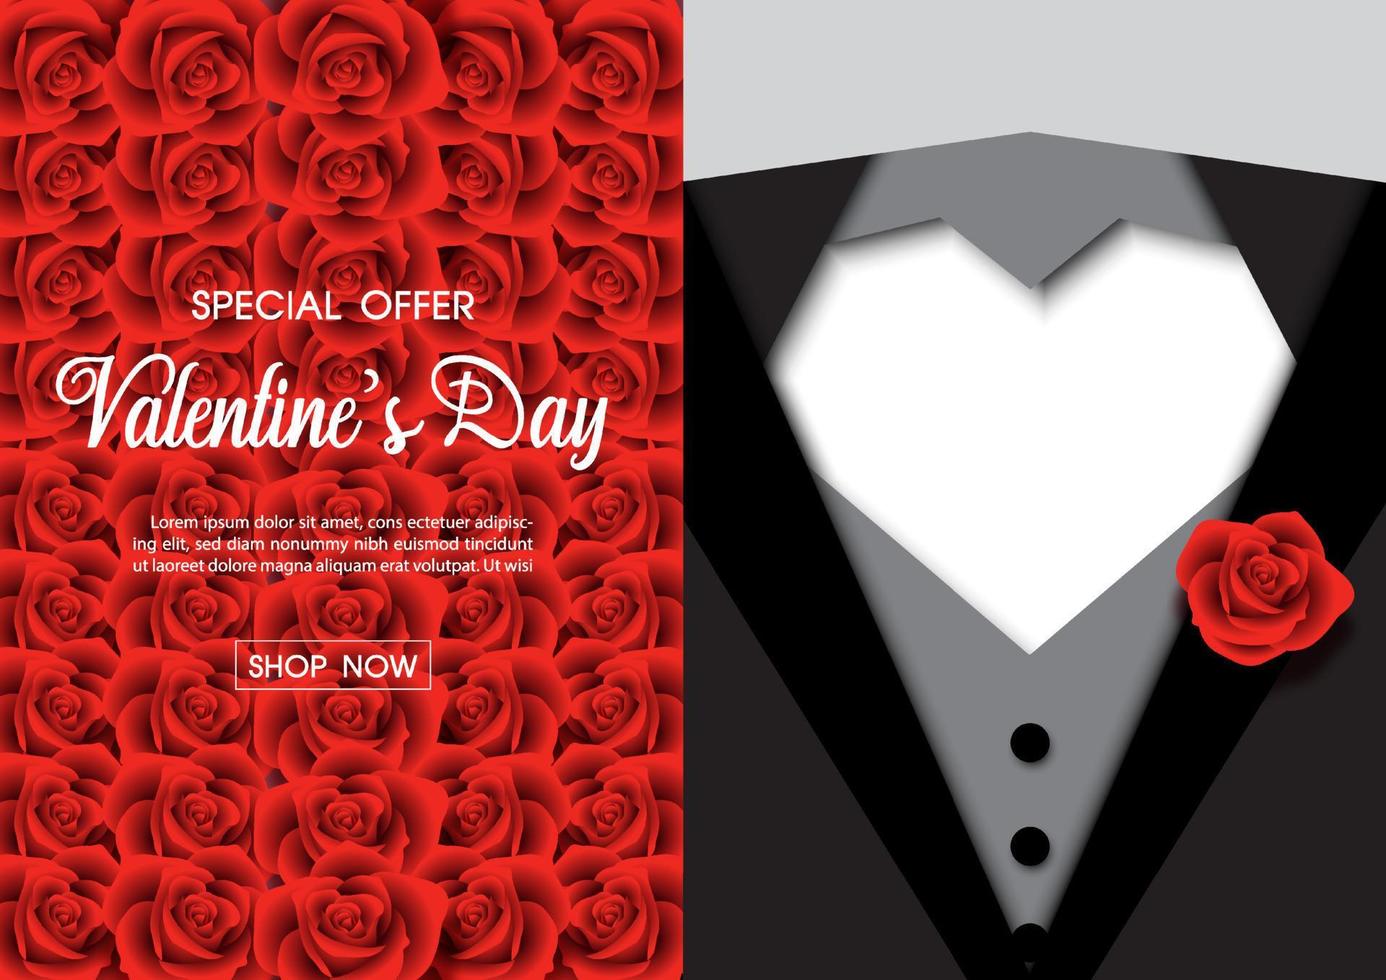 Valentine day's specials offer with special offer sale text on red rose pattern with a tuxedo suit and white heart shape on gray background. Valentine greeting card in sale banner  and vector design